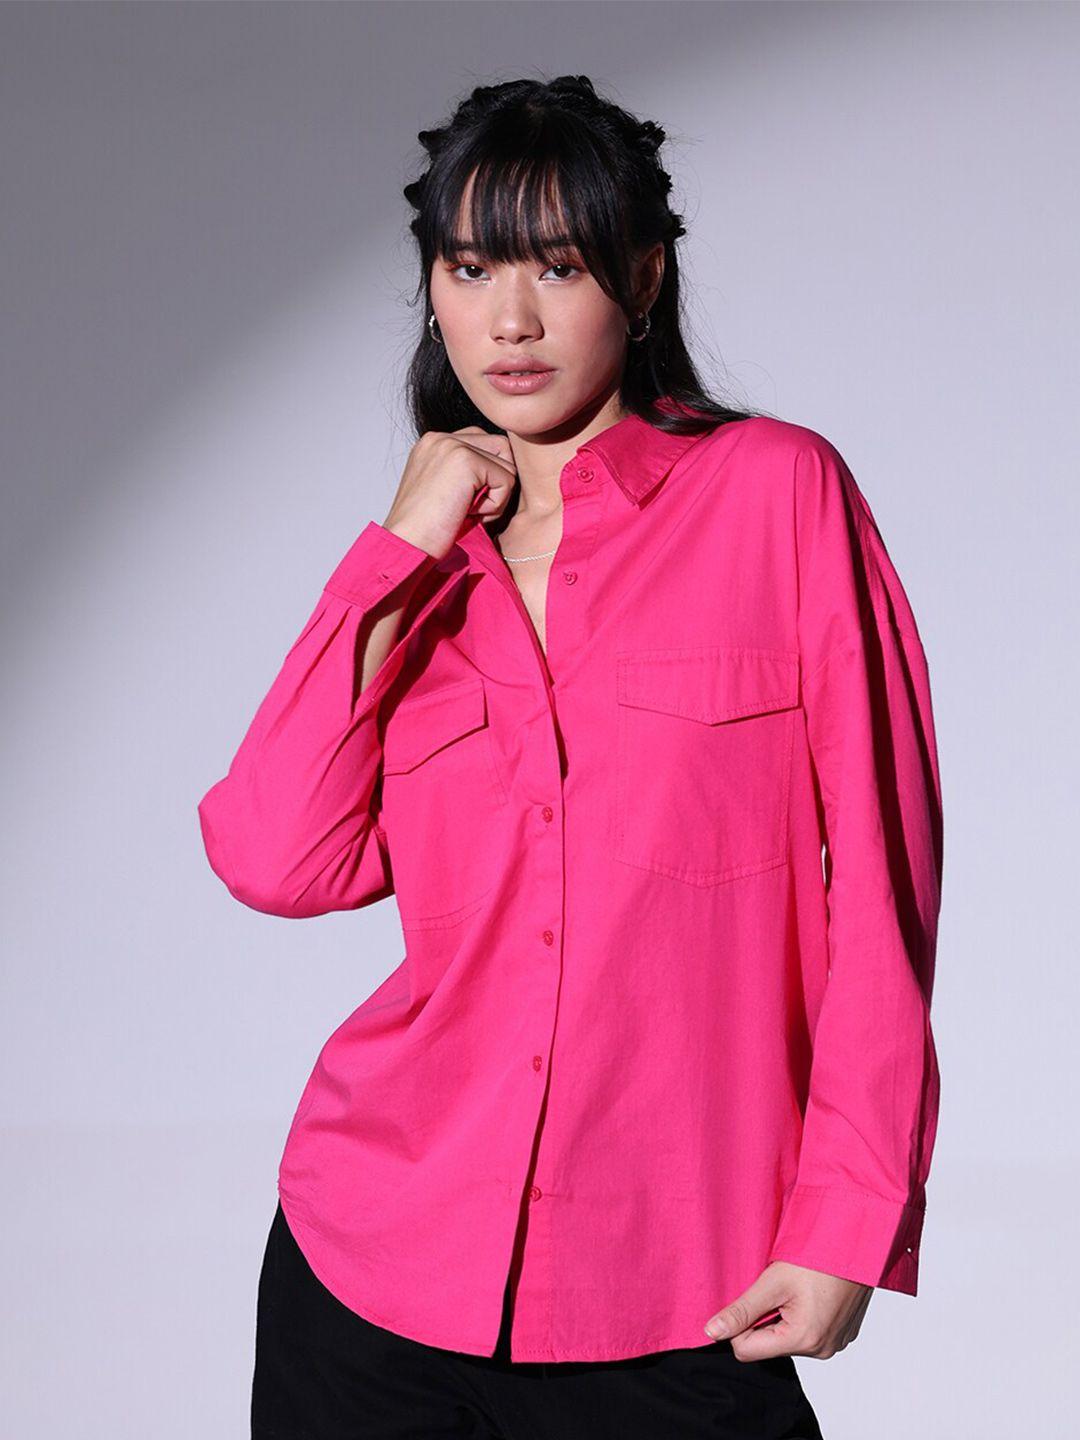 hubberholme relaxed spread collar oversized pure cotton casual shirt